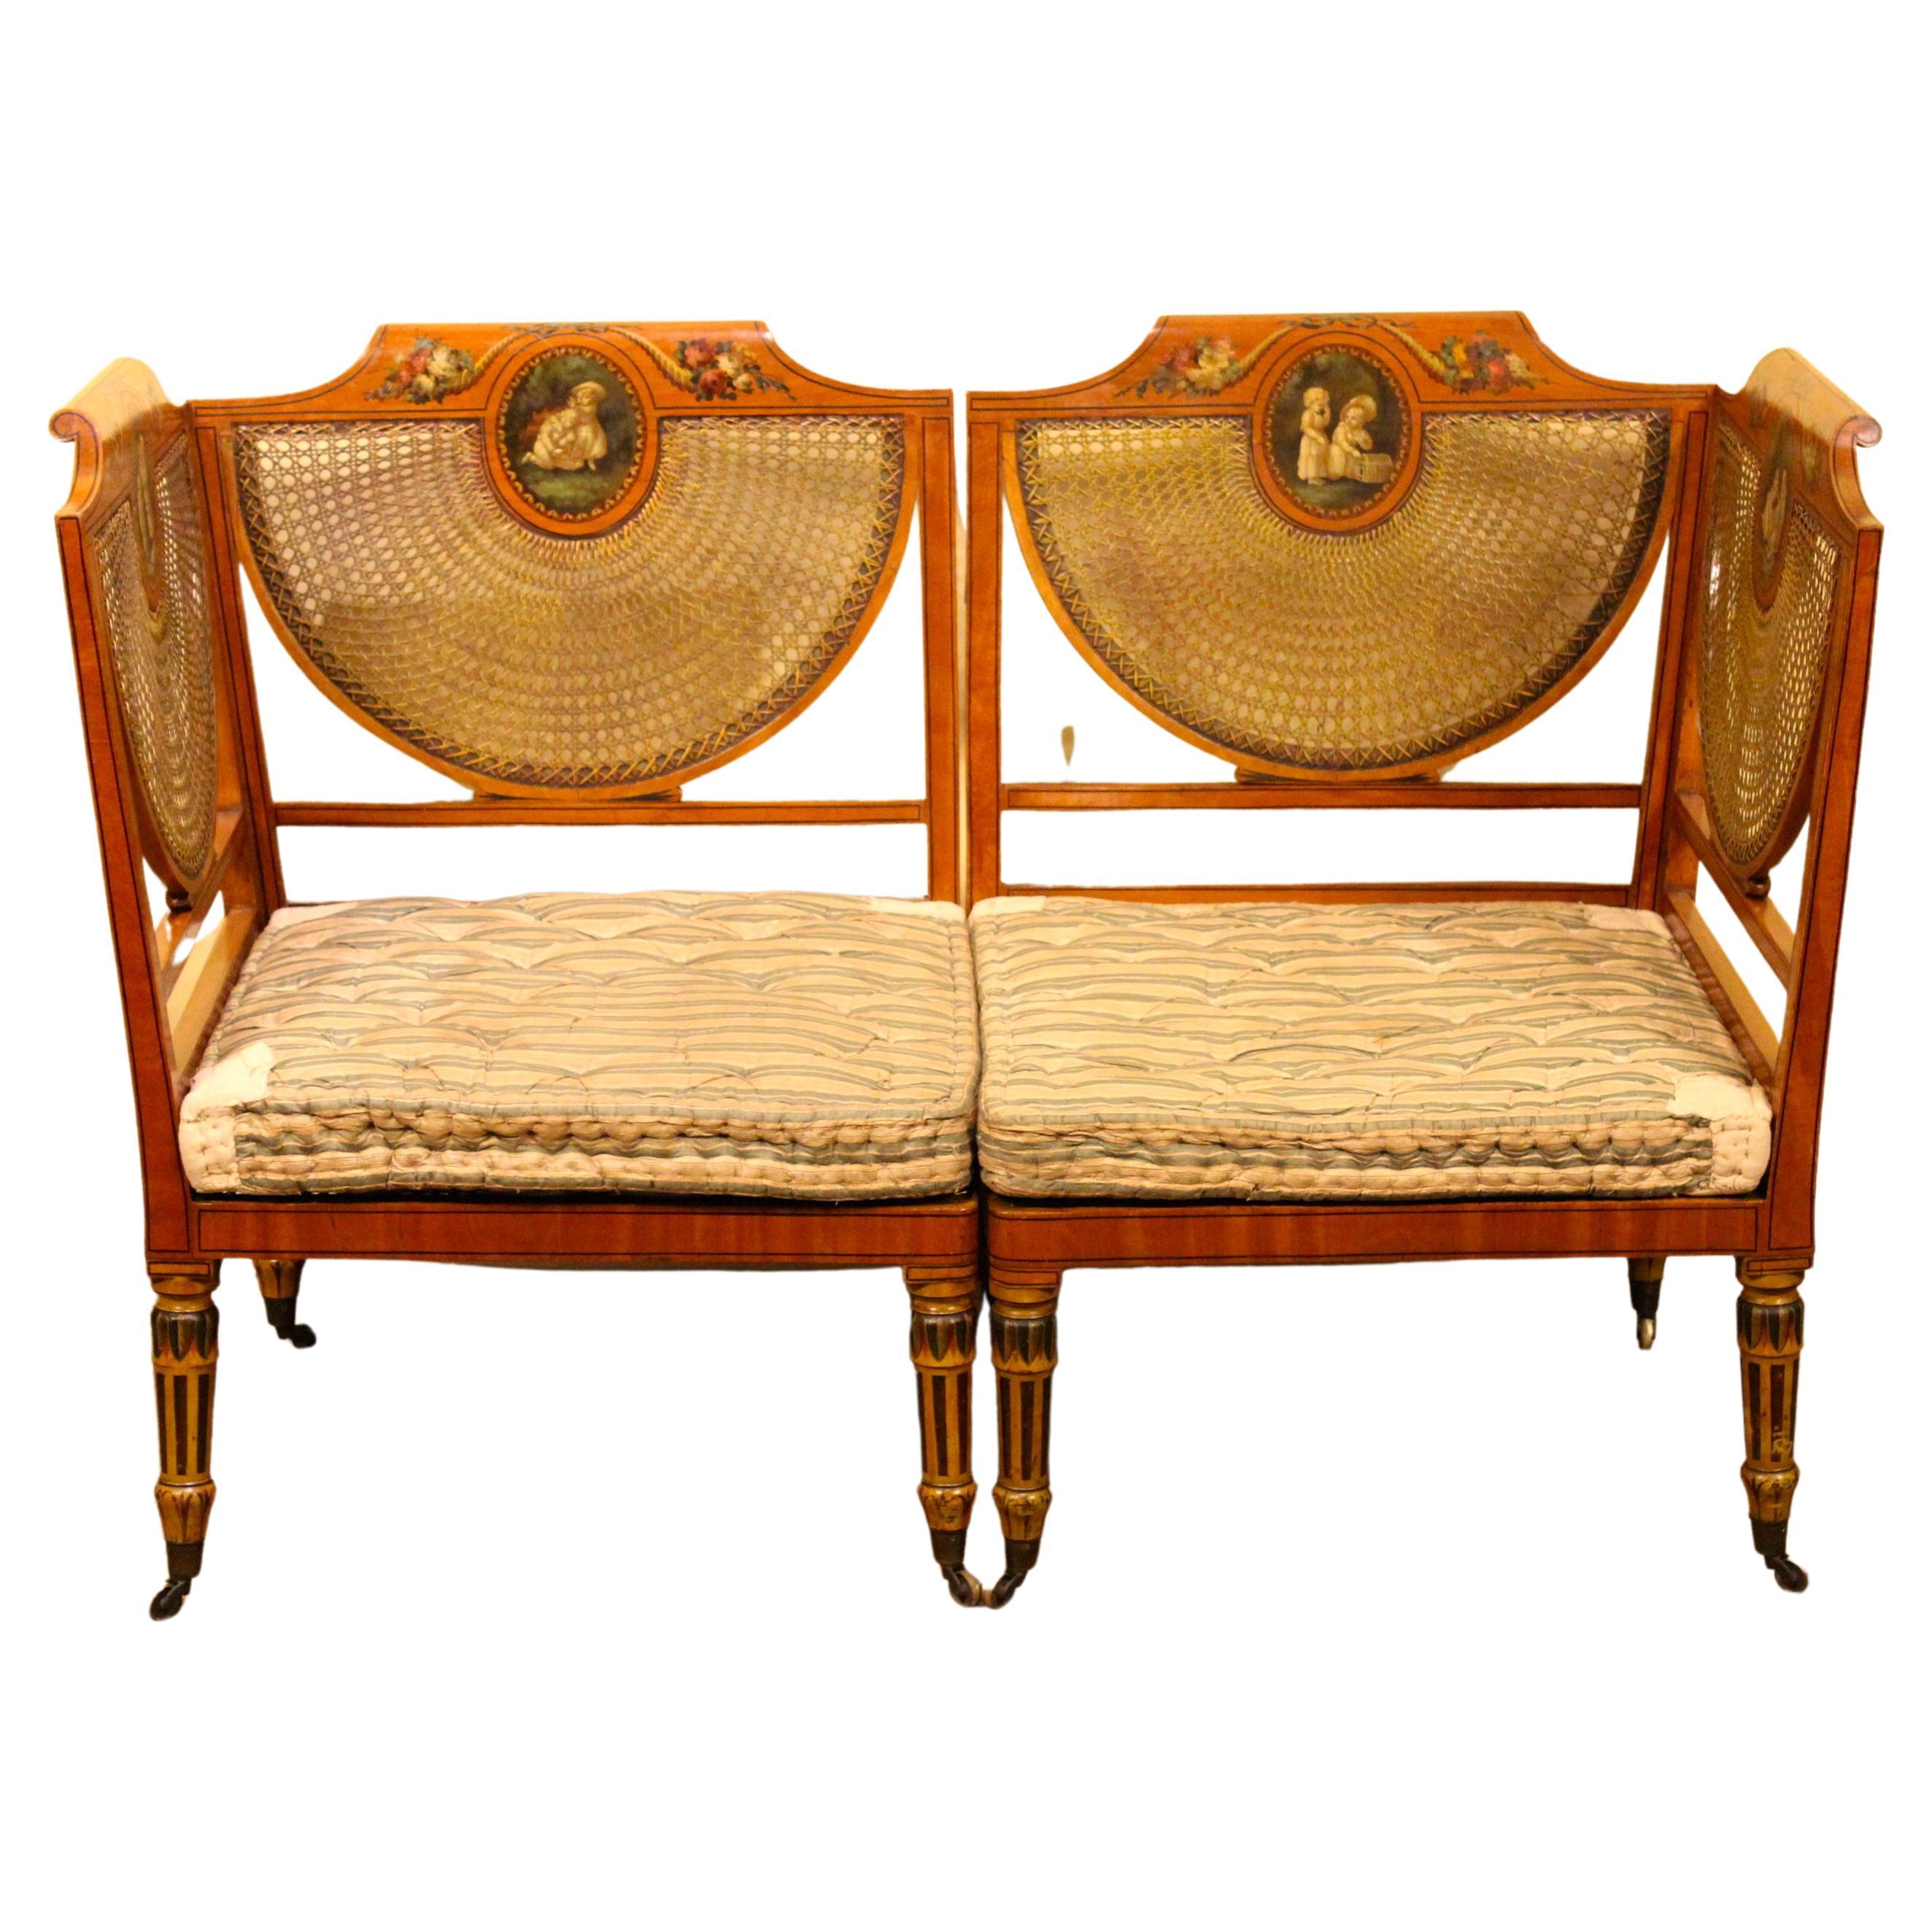 Pair of Late 19thc. Satinwood Corner Seats For Sale